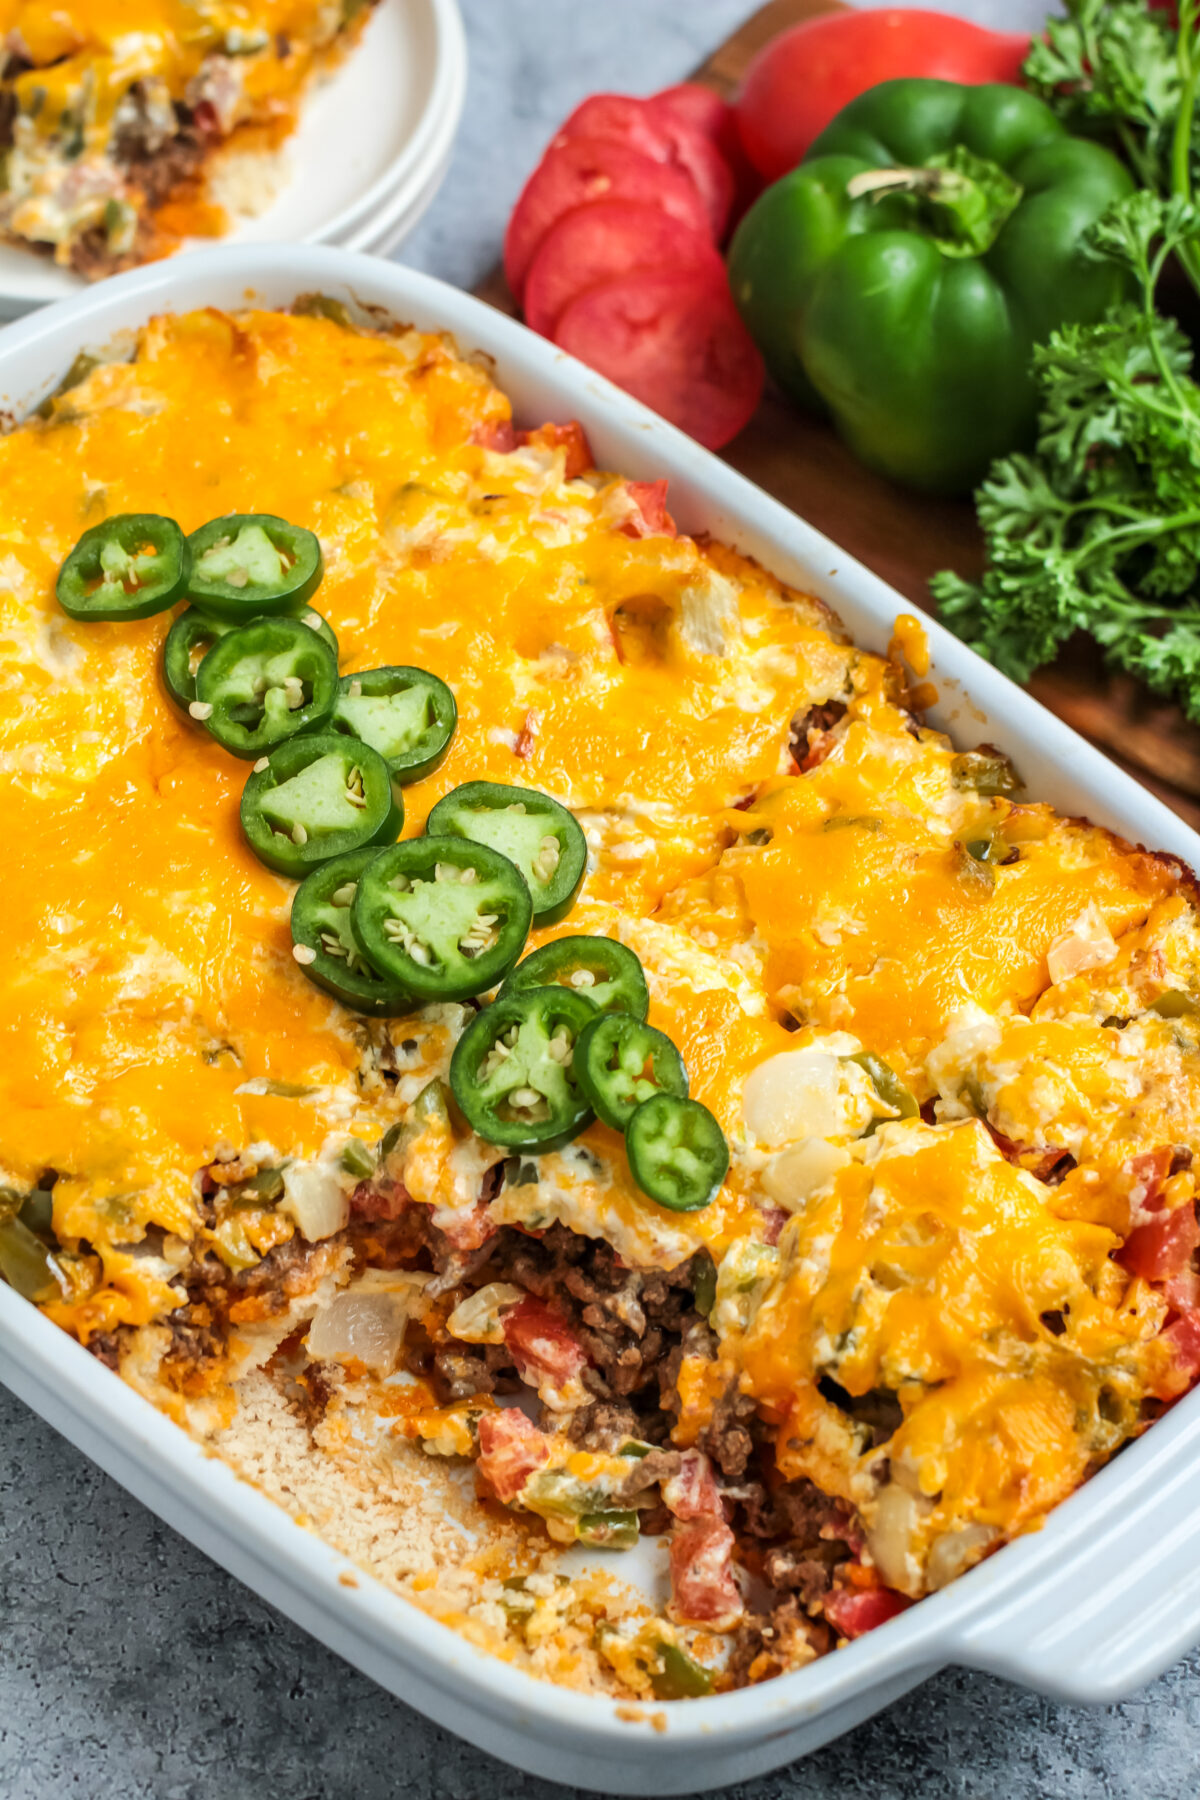 This John Wayne Casserole recipe is easy to make and results in a hearty, comforting casserole dish with loads of south-west flavour!